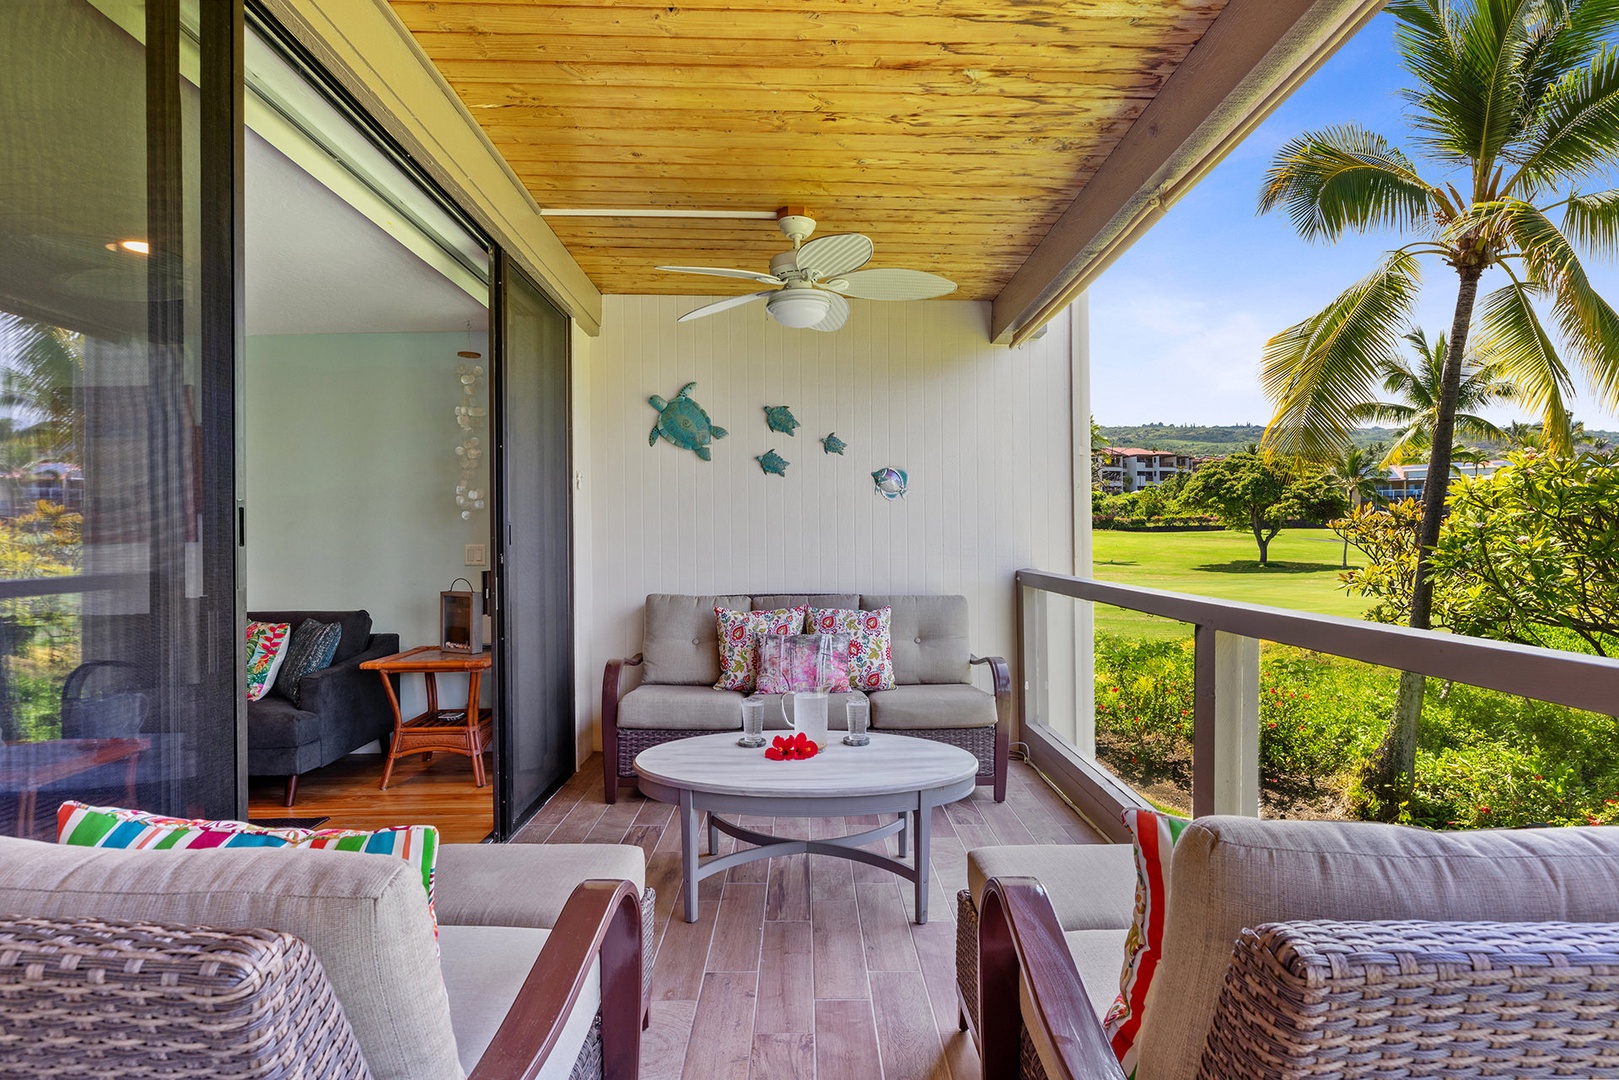 Lanai with amazing views and outdoor seating